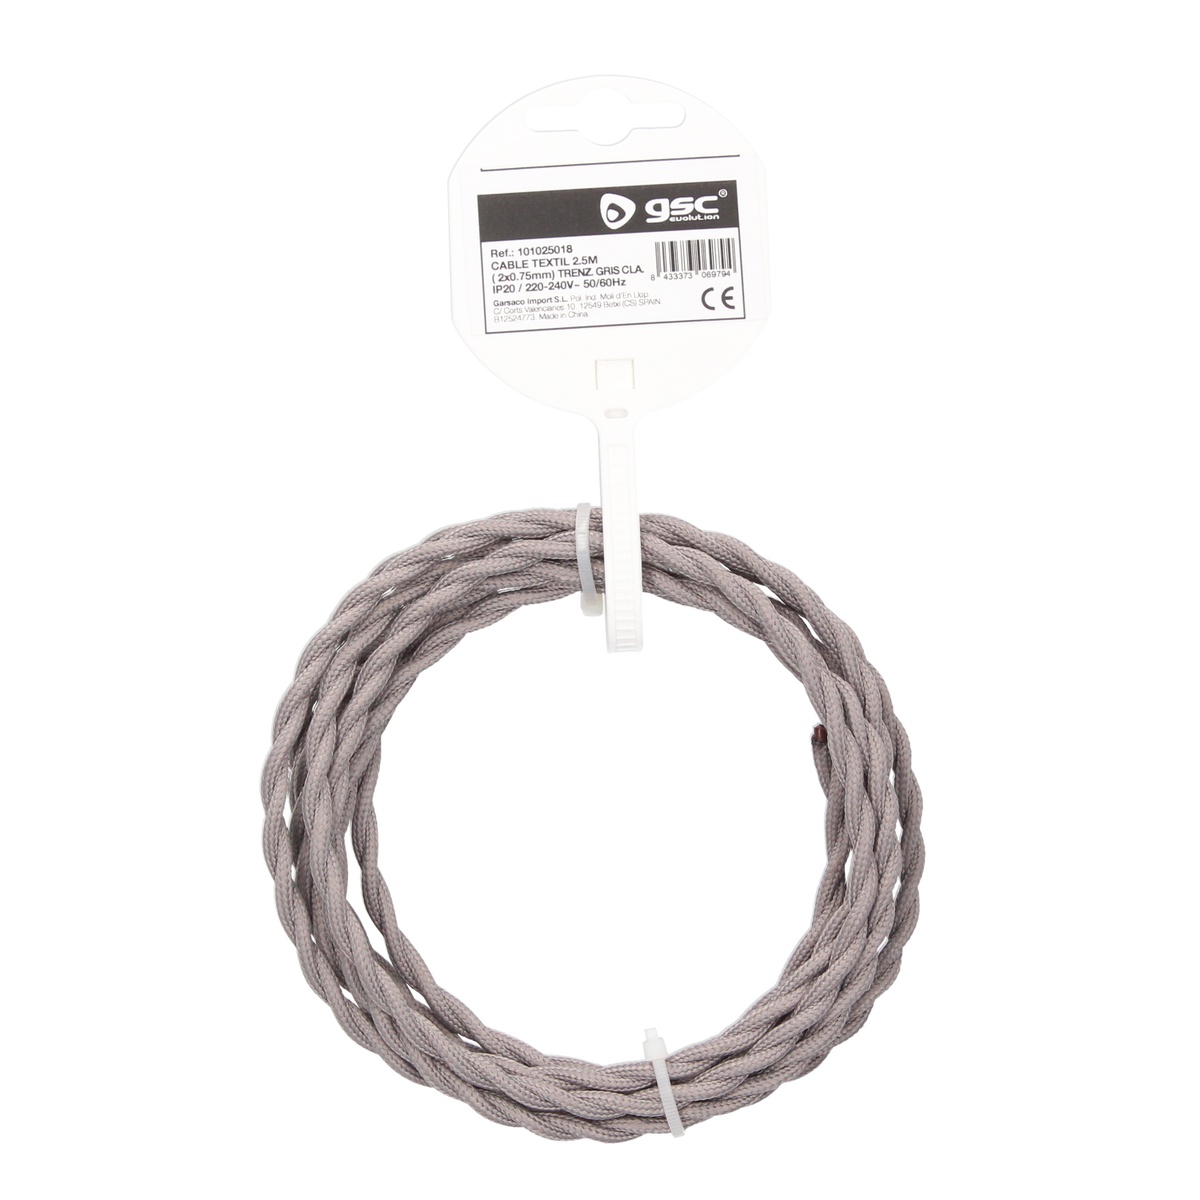 2.5m textile cable (2x0.75mm) Braided gray braided